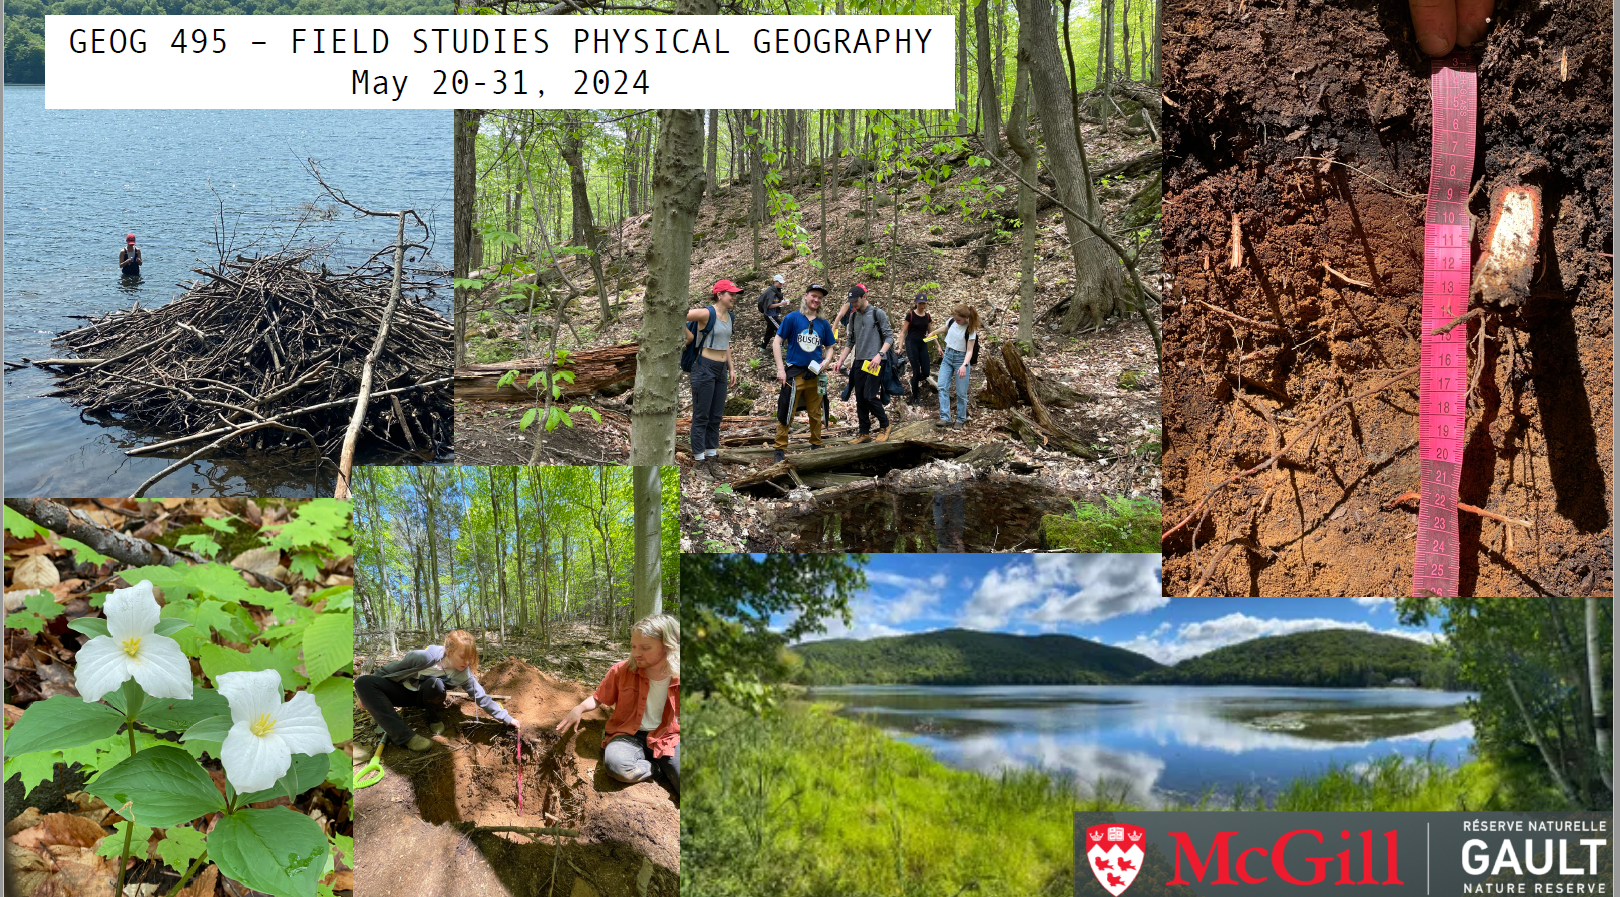 a collage of images of students conducting field work in the forest, streams and lake in summer at the McGill Gault Nature Reserve in Mont-Saint-Hilaire, Québec